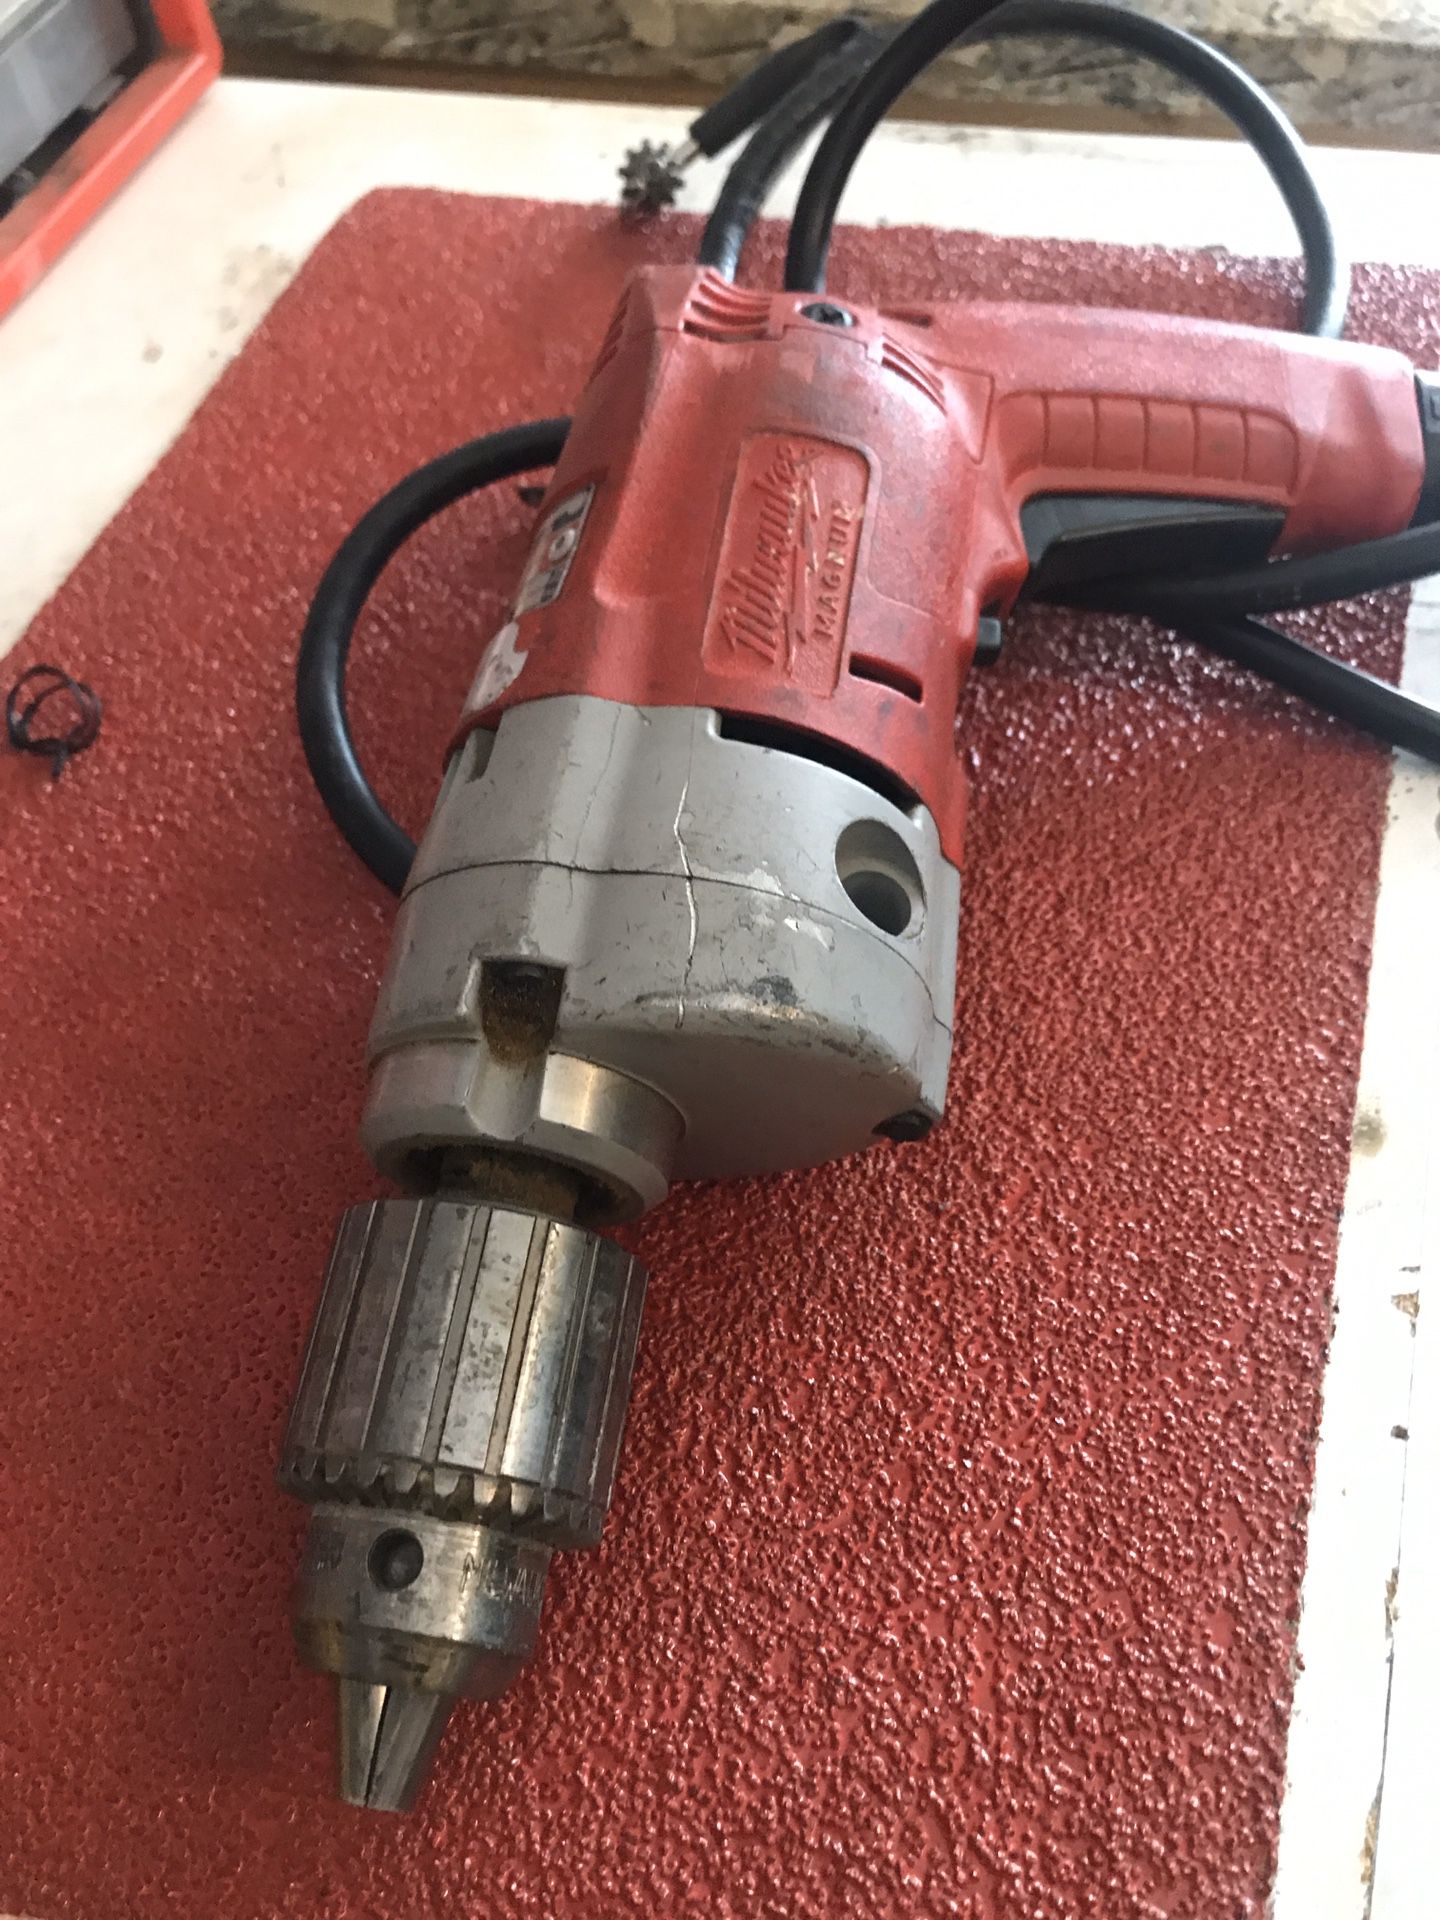 Milwaukee Drill - 1/2” Heavy Duty Corded Drill solid tool. Retails for over $150. Storage unit has to be cleaned out today. Best offer takes it!!!